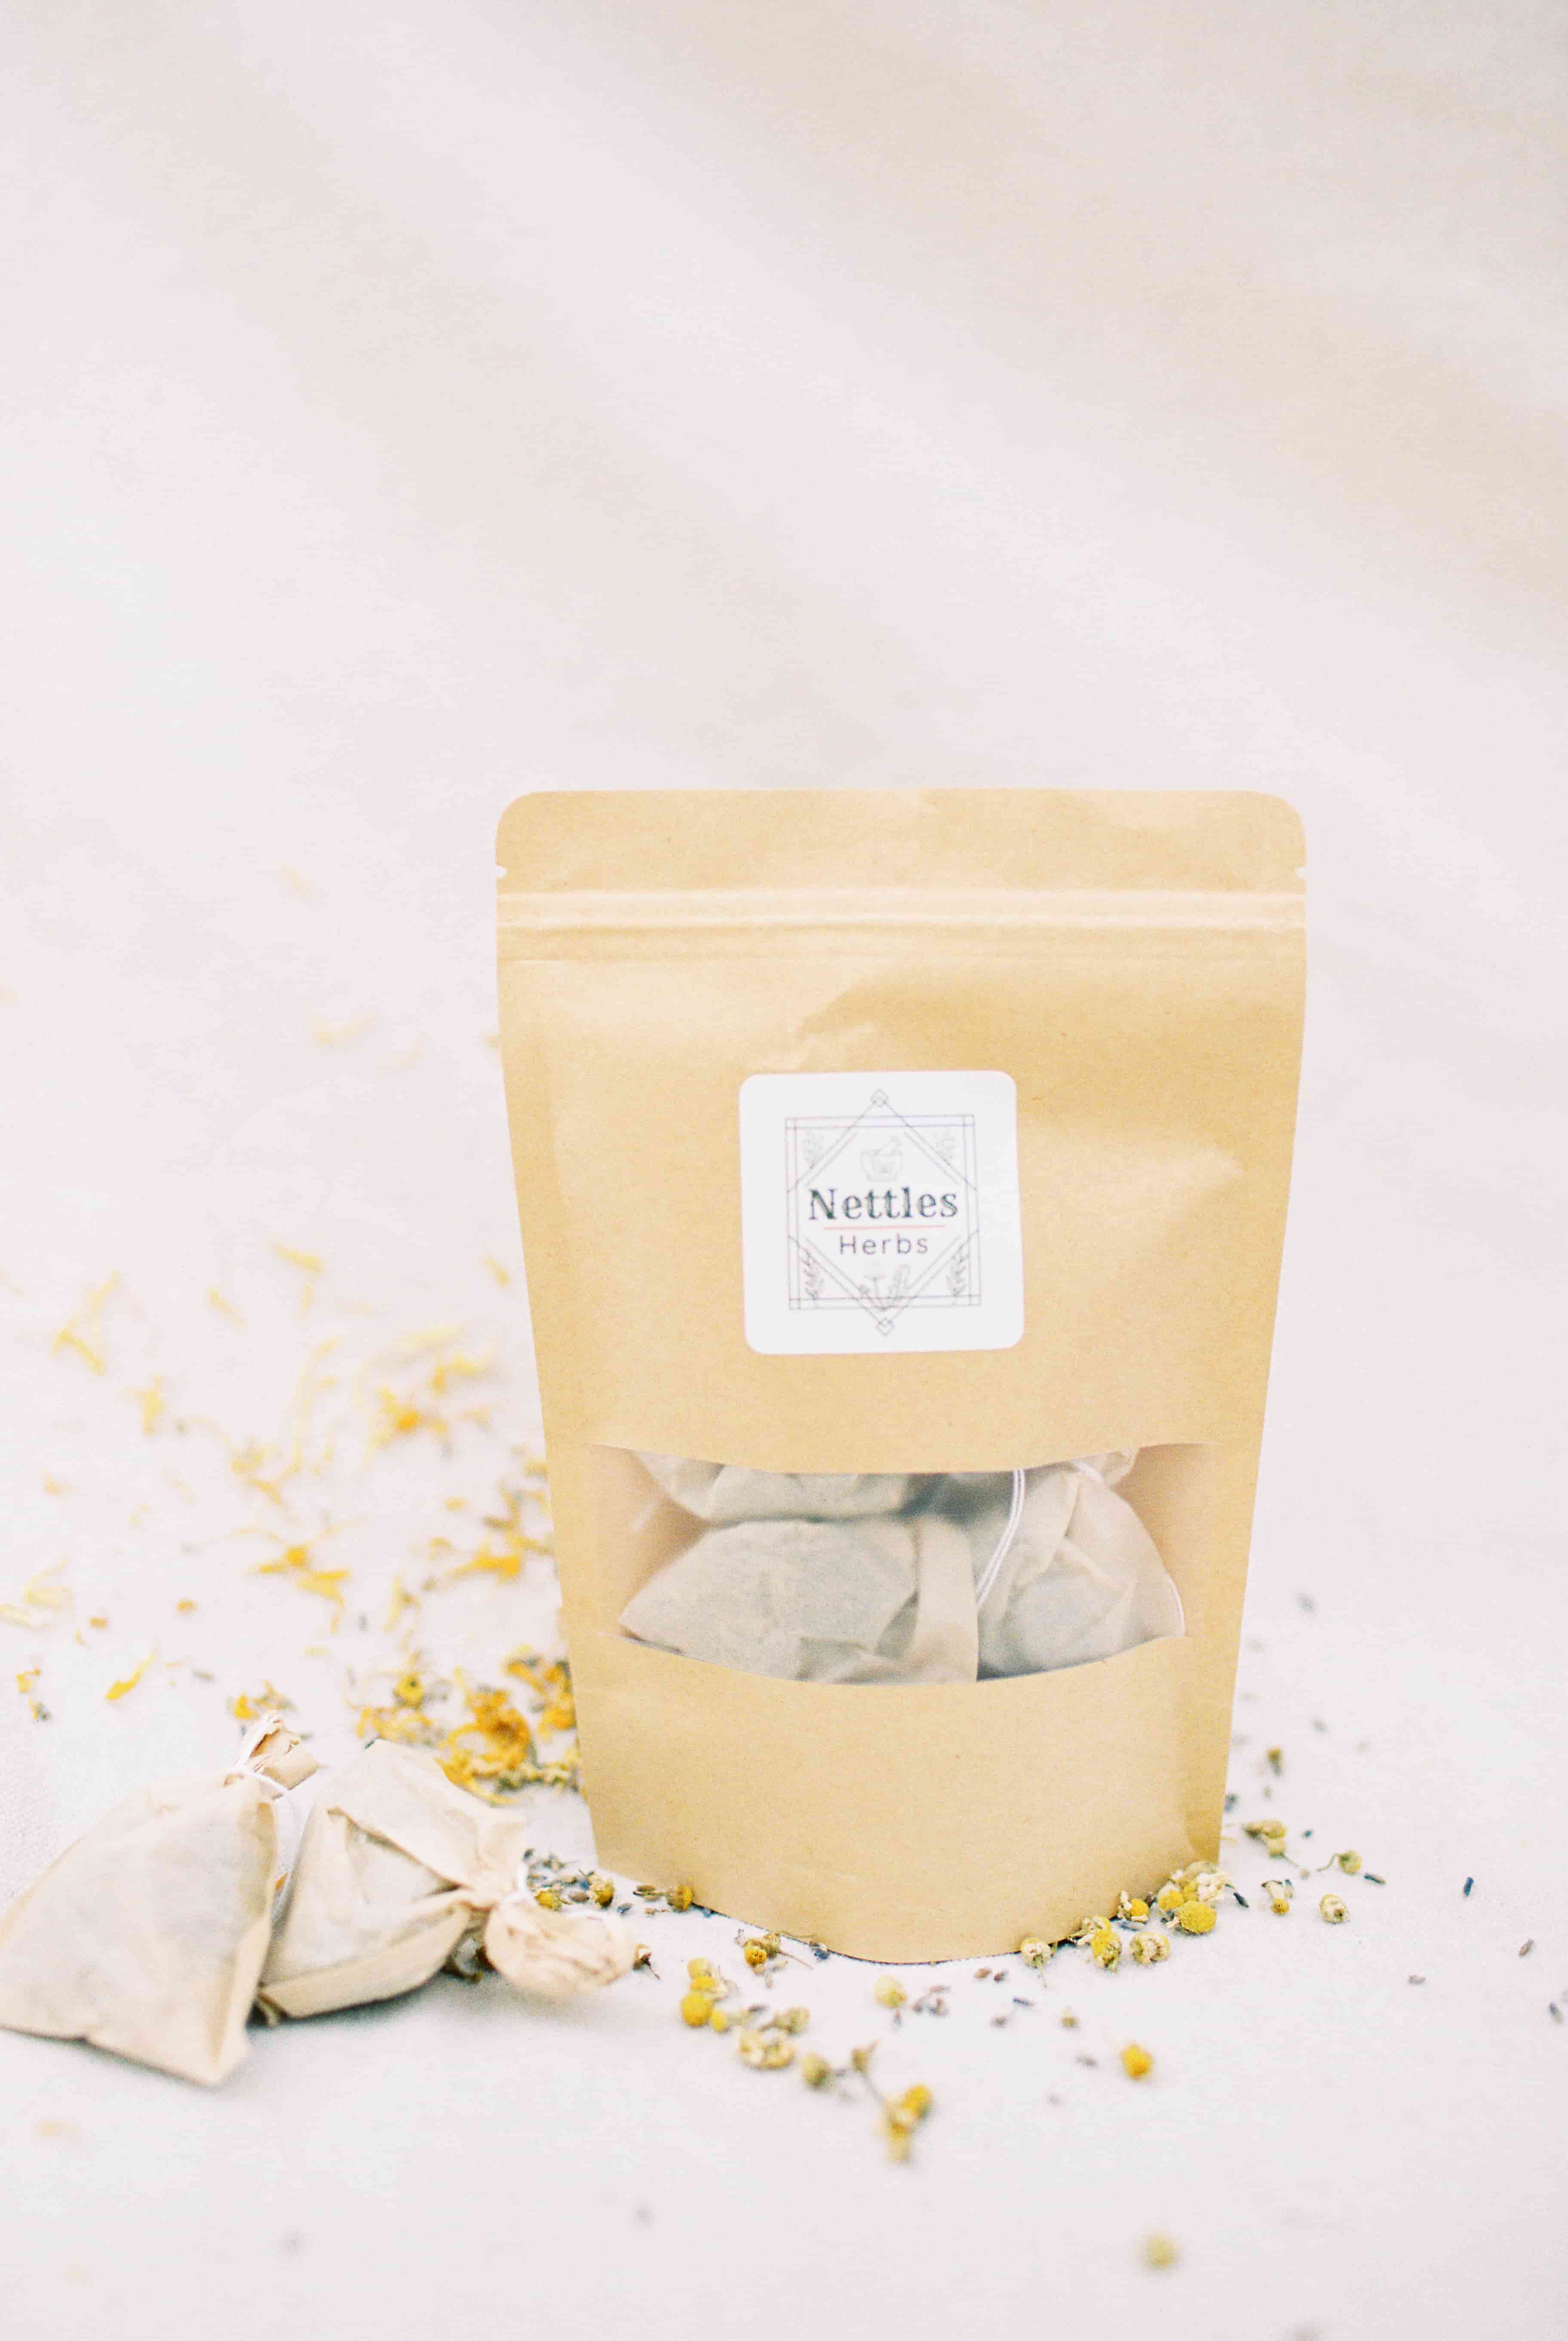 Made with organic herbs, this blend comes with 10 pre-packaged tea bags for 10 healing steams. Herbs used are organic calendula, lavender, mugwort, red raspberry leaf, yarrow, and sea salt